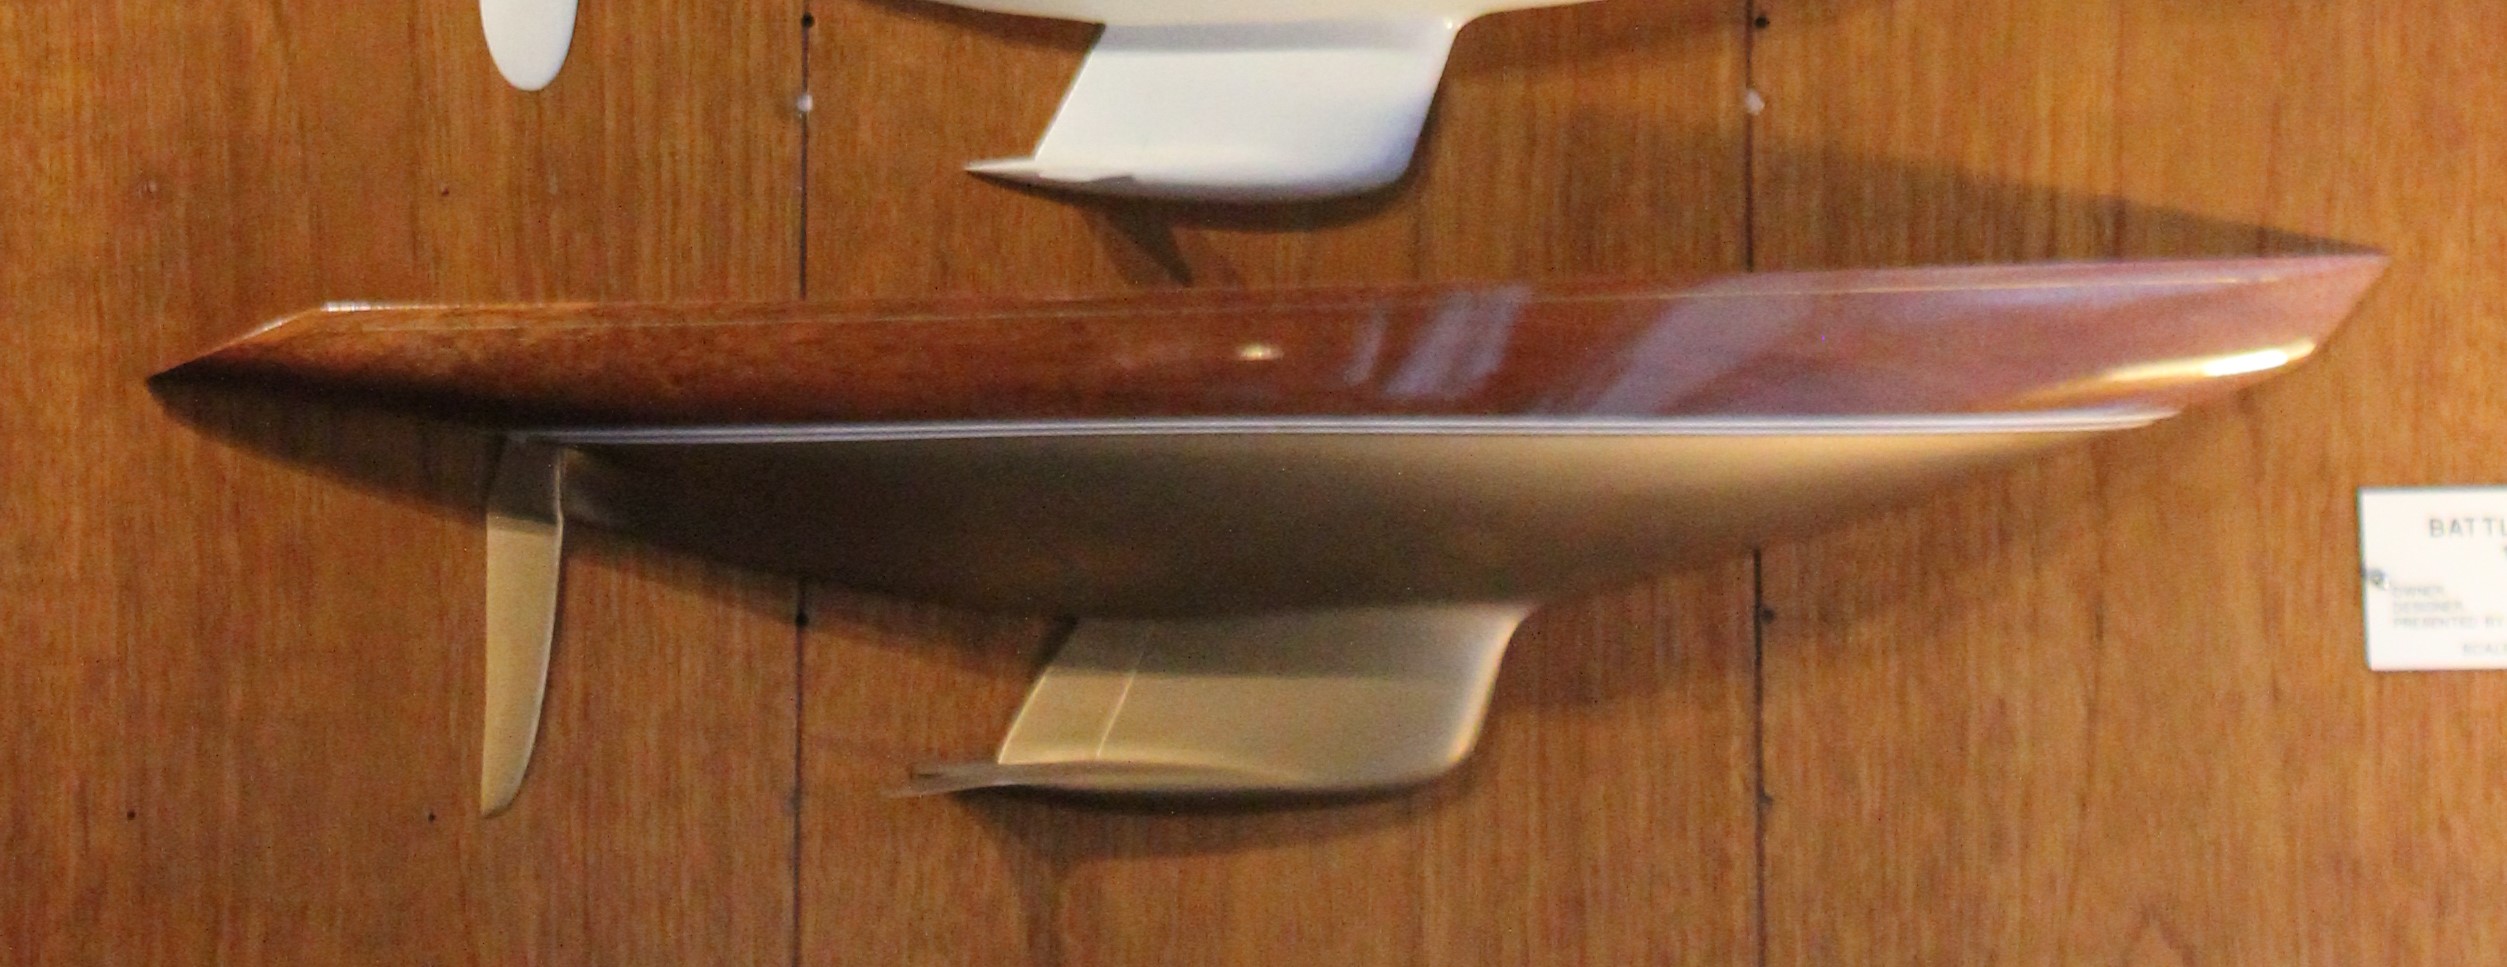 Boat model mounted on a wooden wall